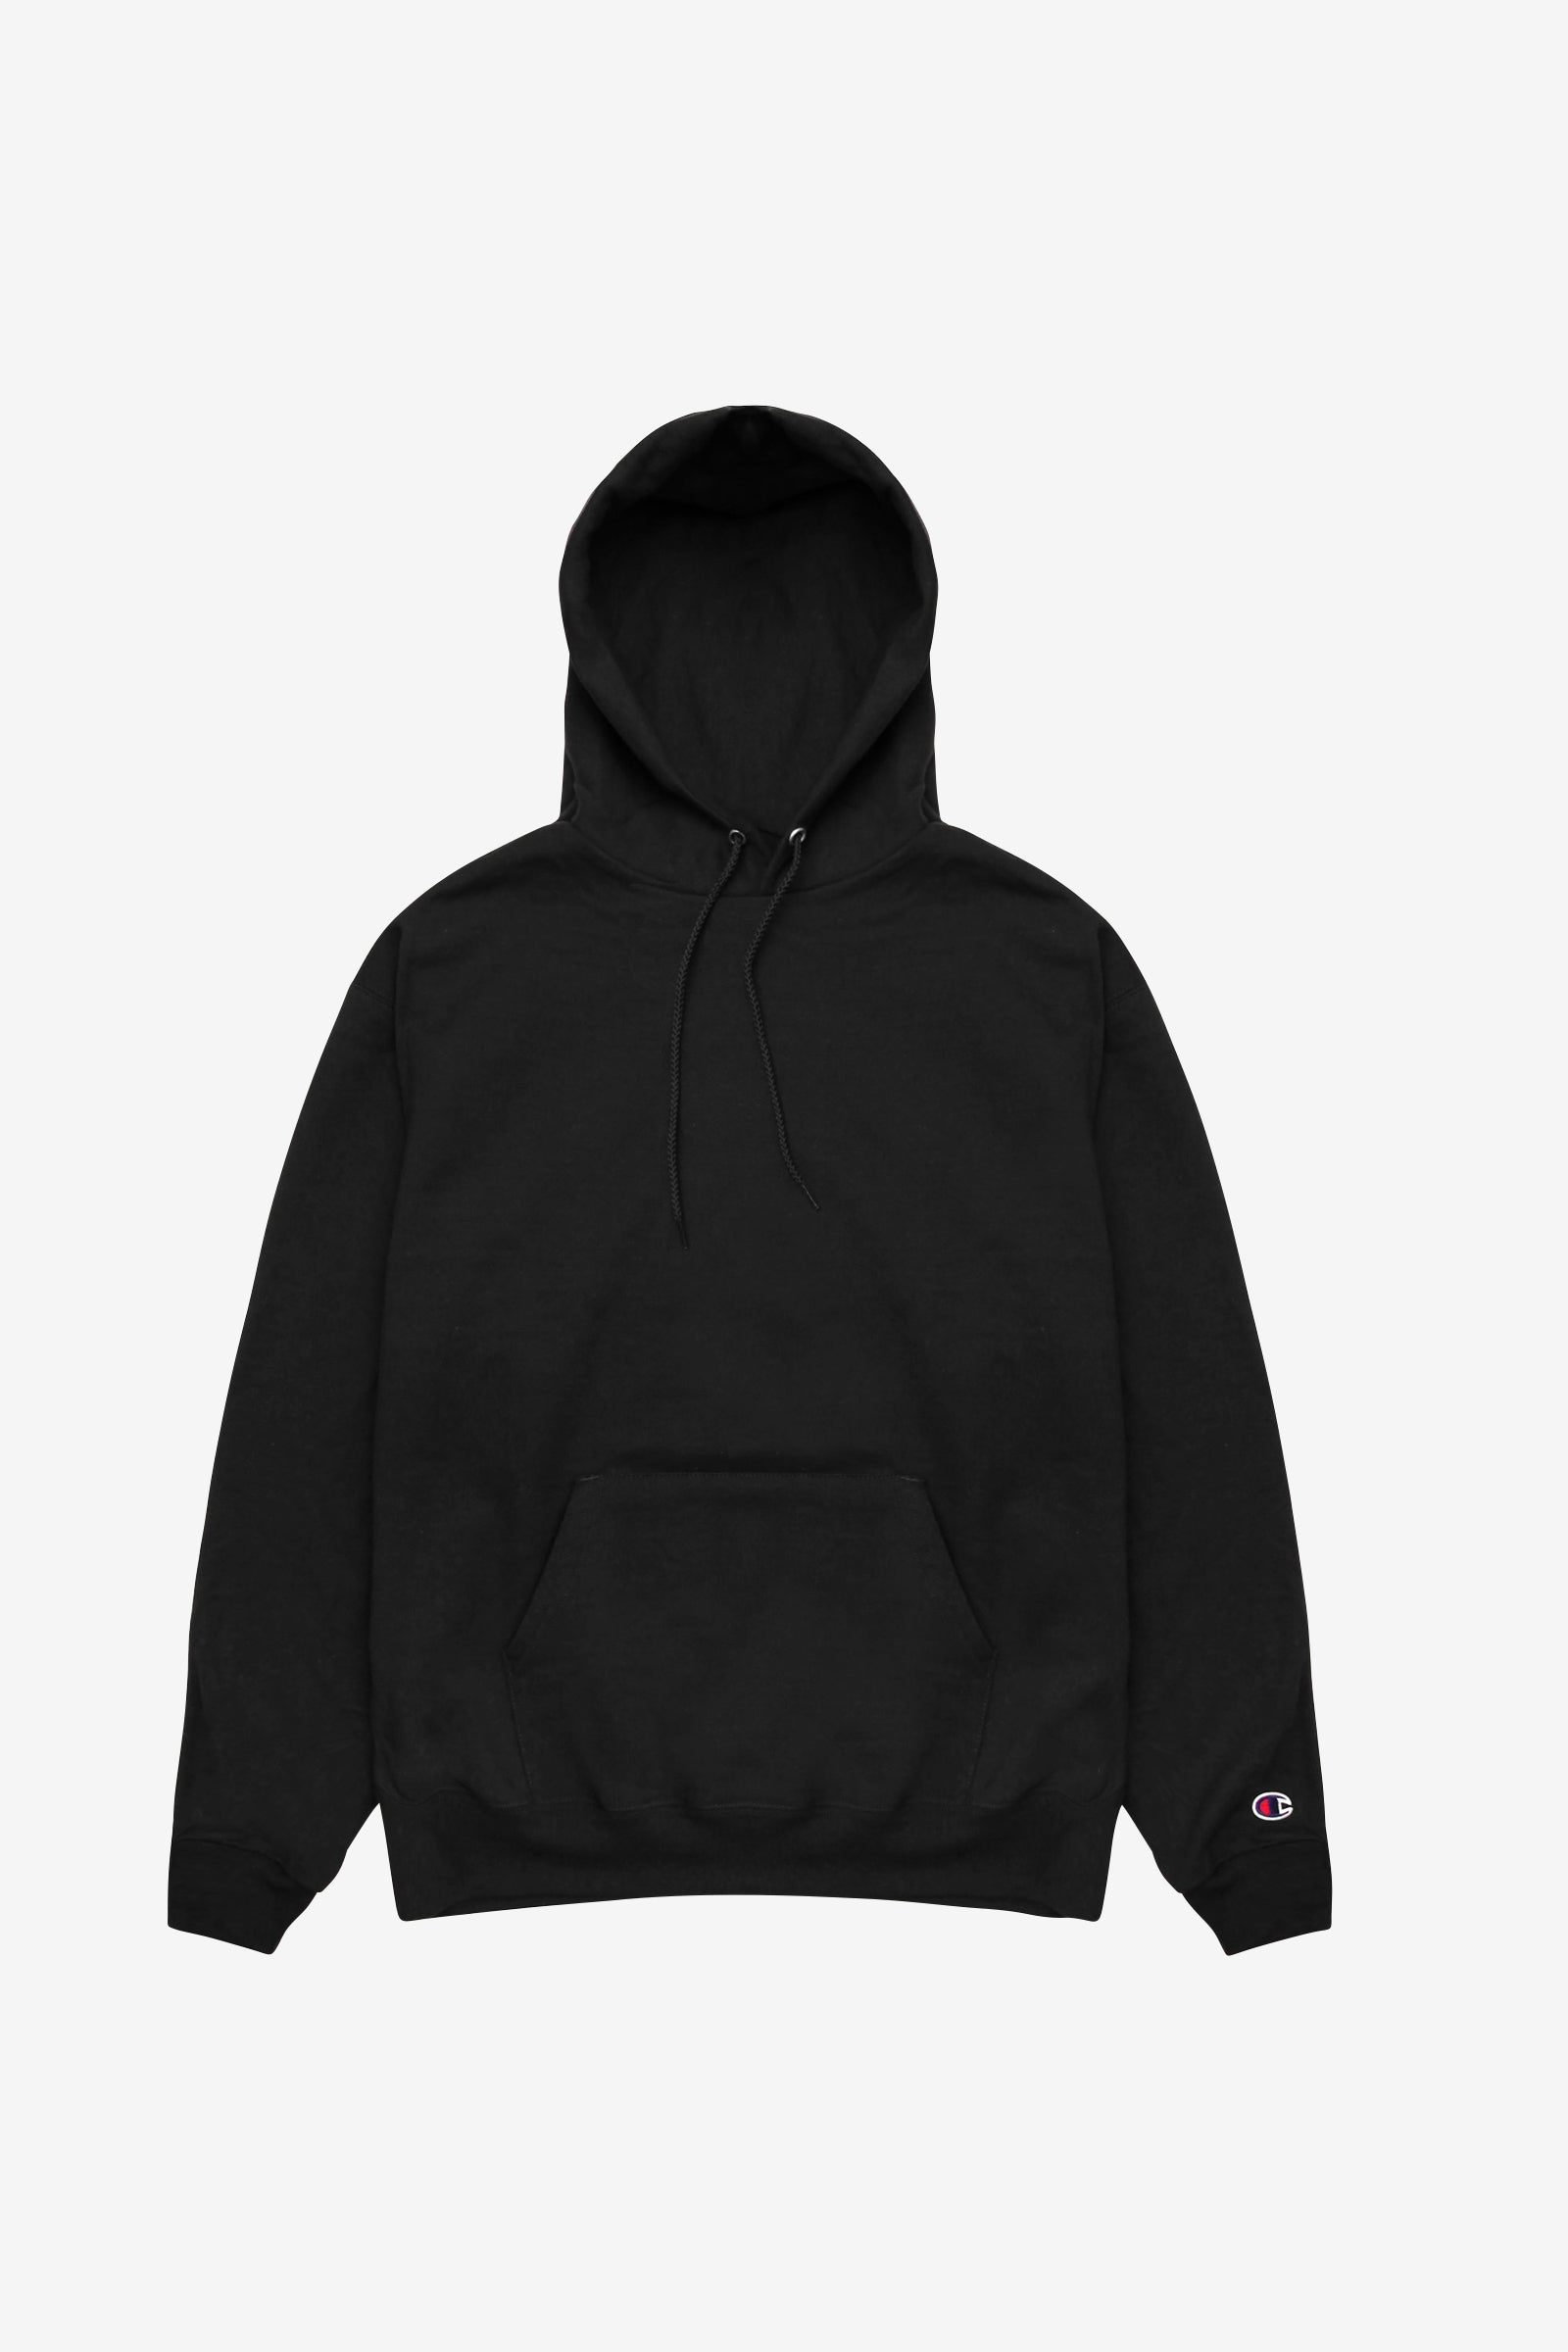 where can you get a champion hoodie